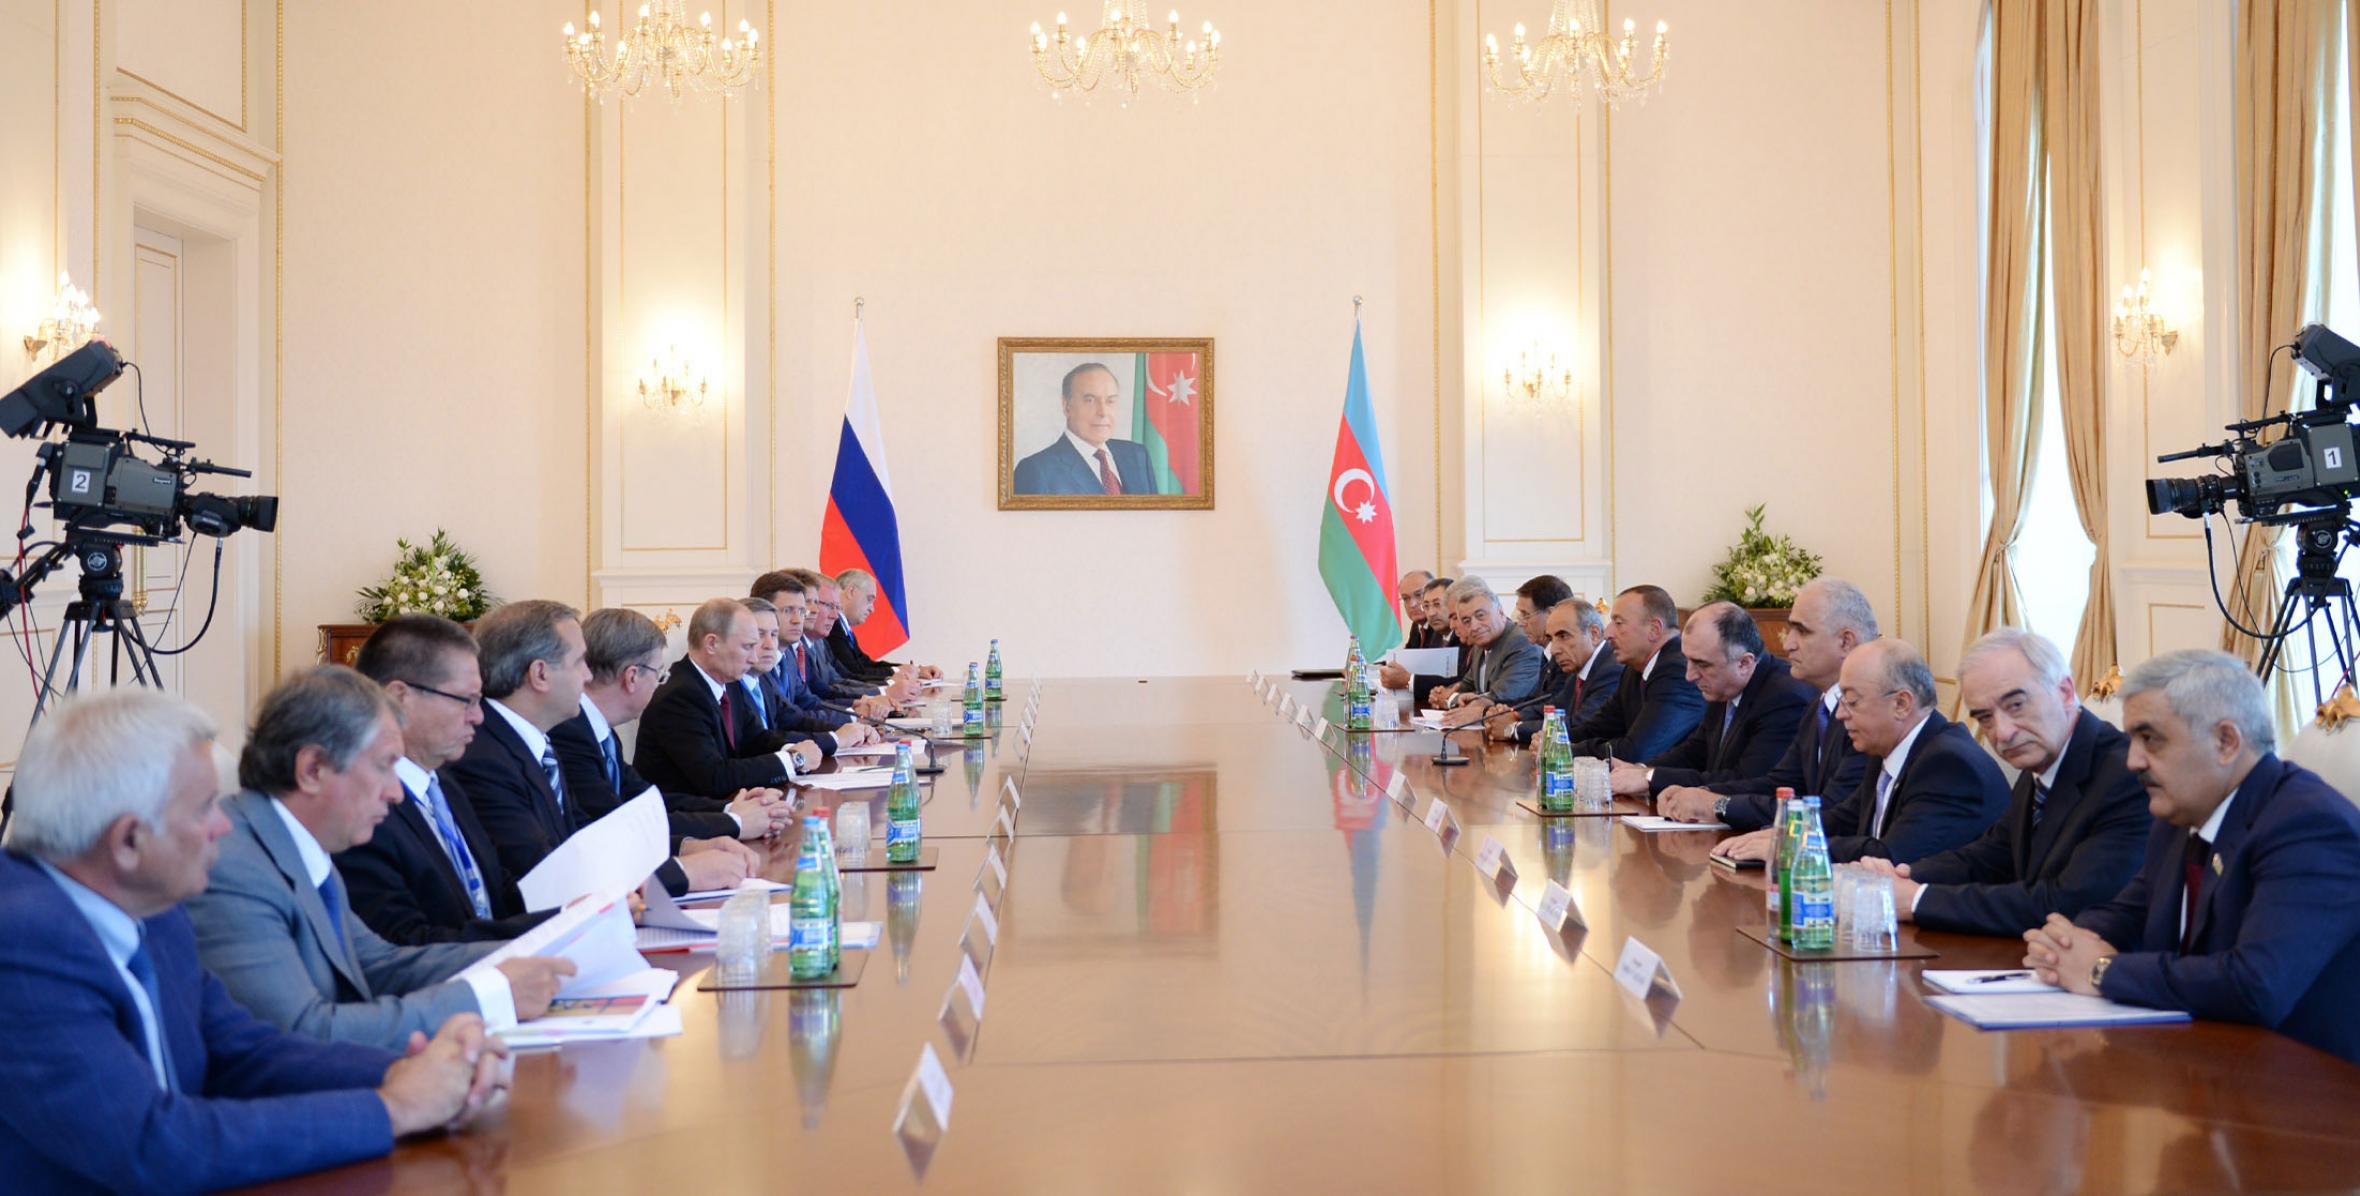 Ilham Aliyev and President of Russia Vladimir Putin held a meeting in an expanded format with the participation of delegations